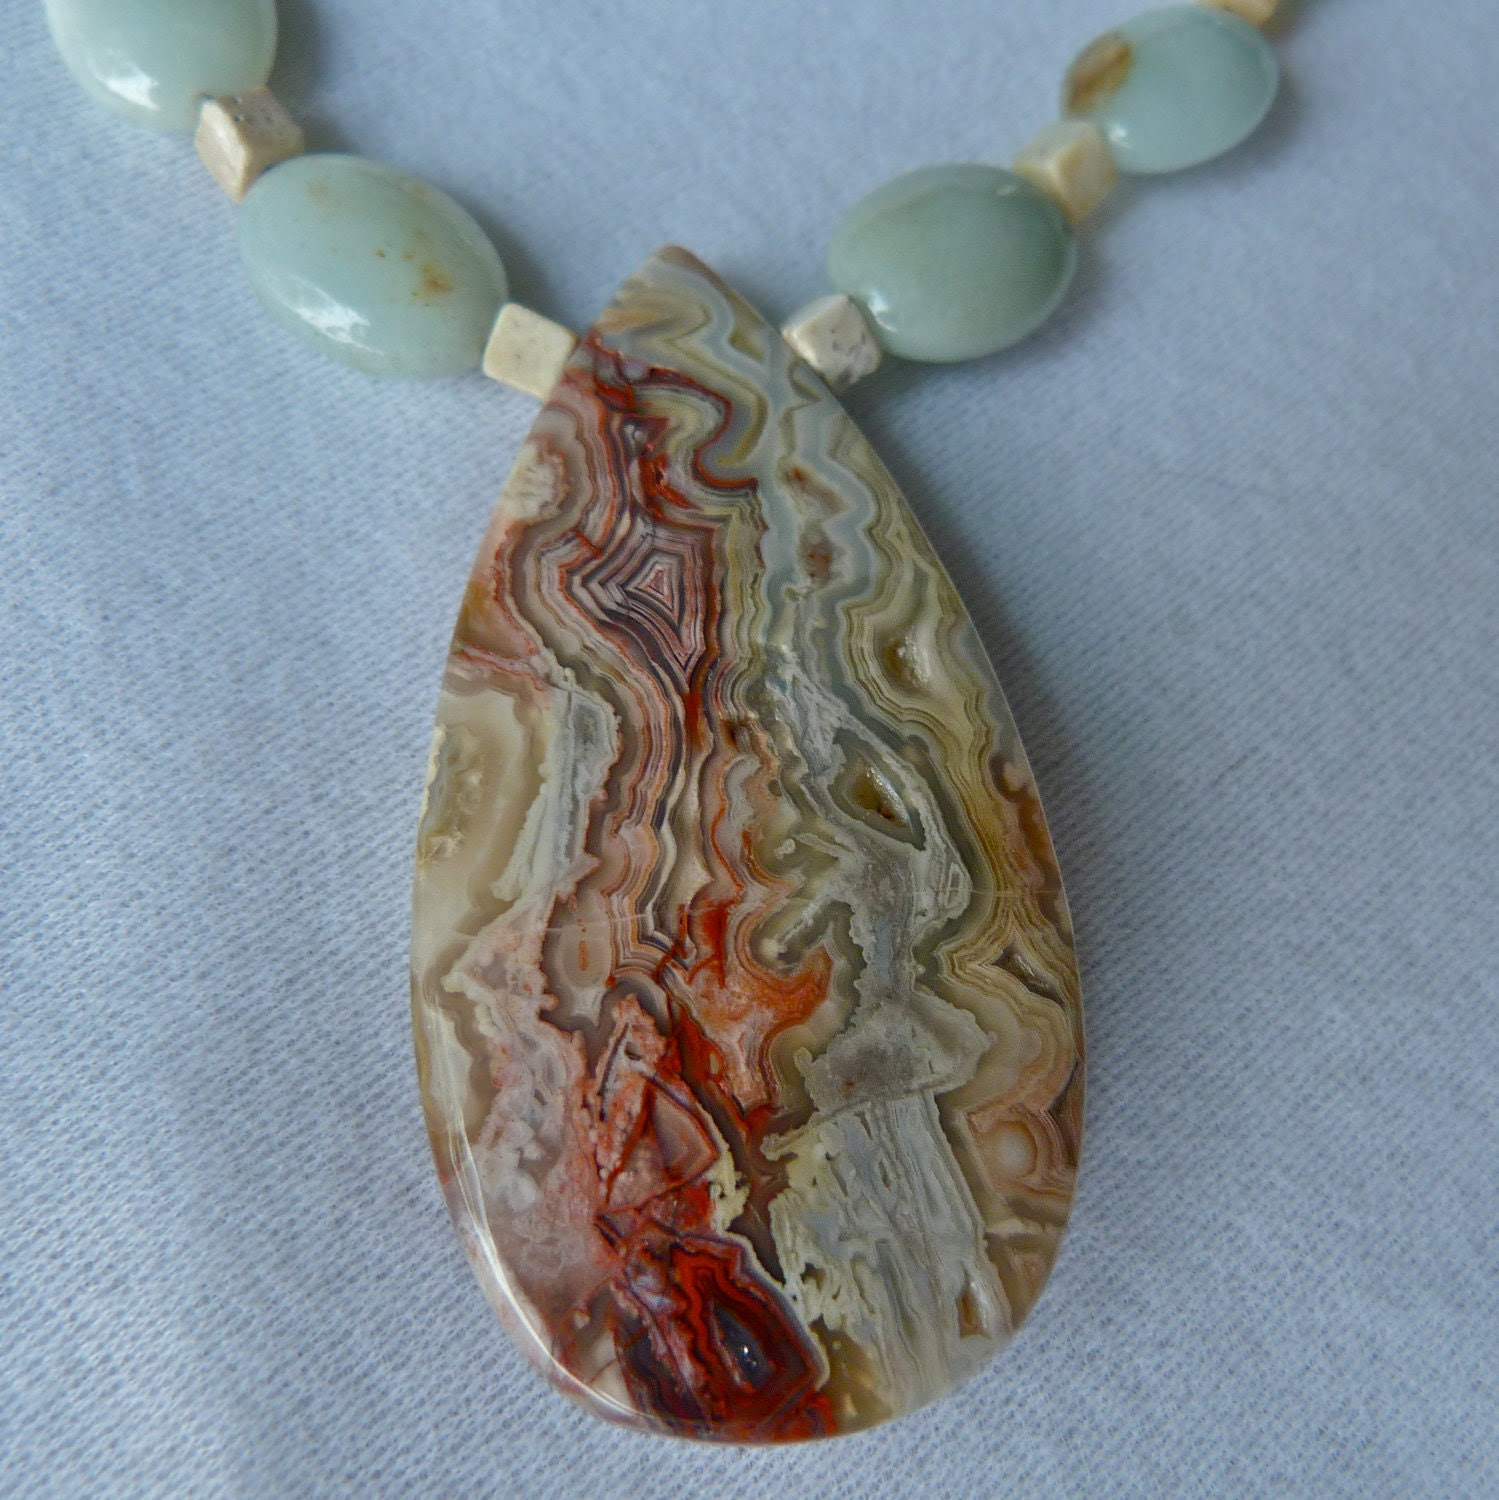 Magnificent Laguna Lace Agate Pendant and Amazonite Necklace - StoneSongNecklaces